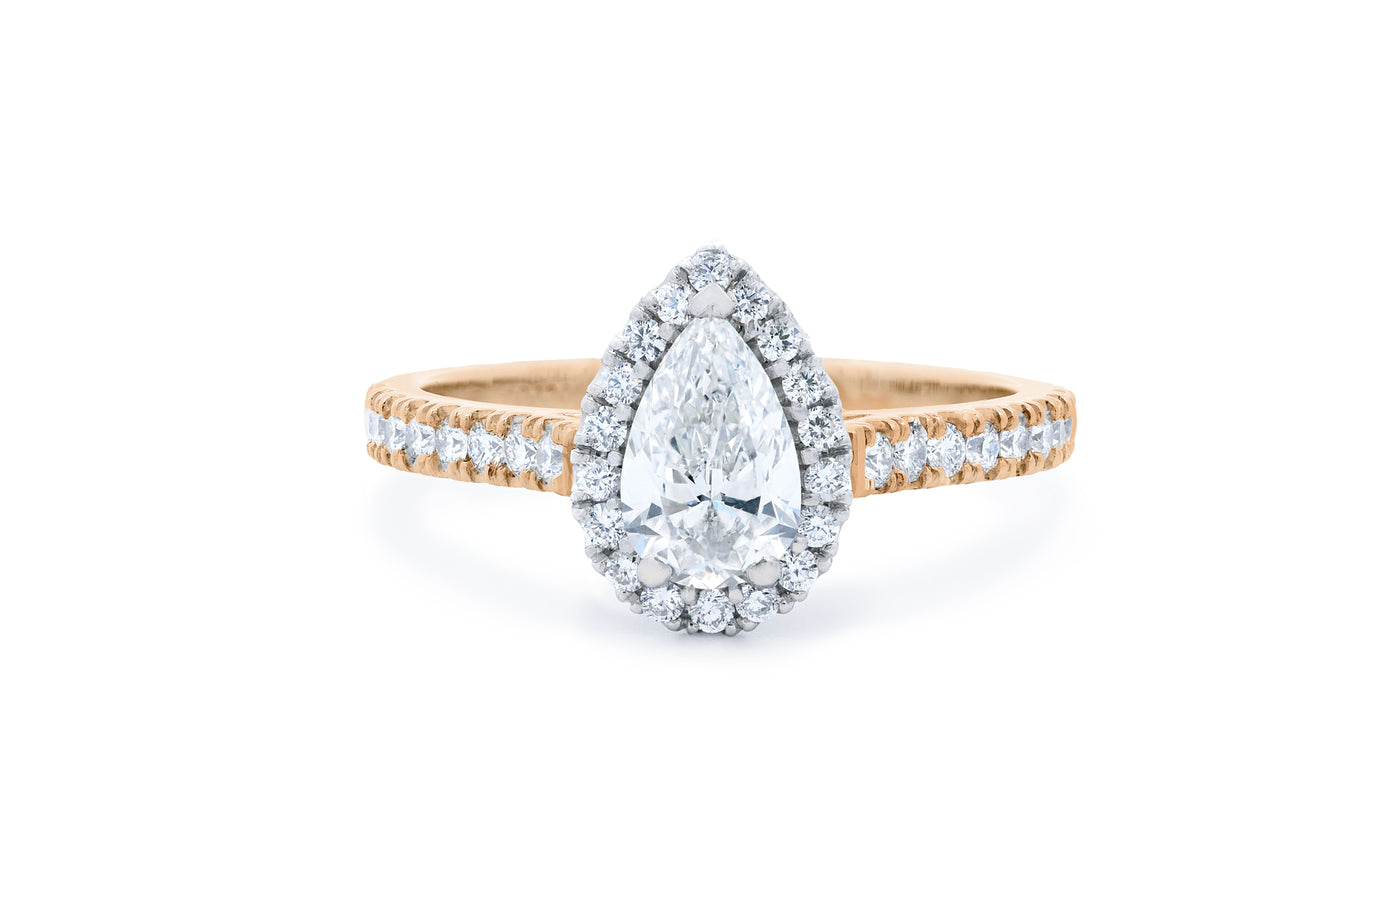 Adorn: Pear Cut Diamond Halo Ring in rose gold and platinum